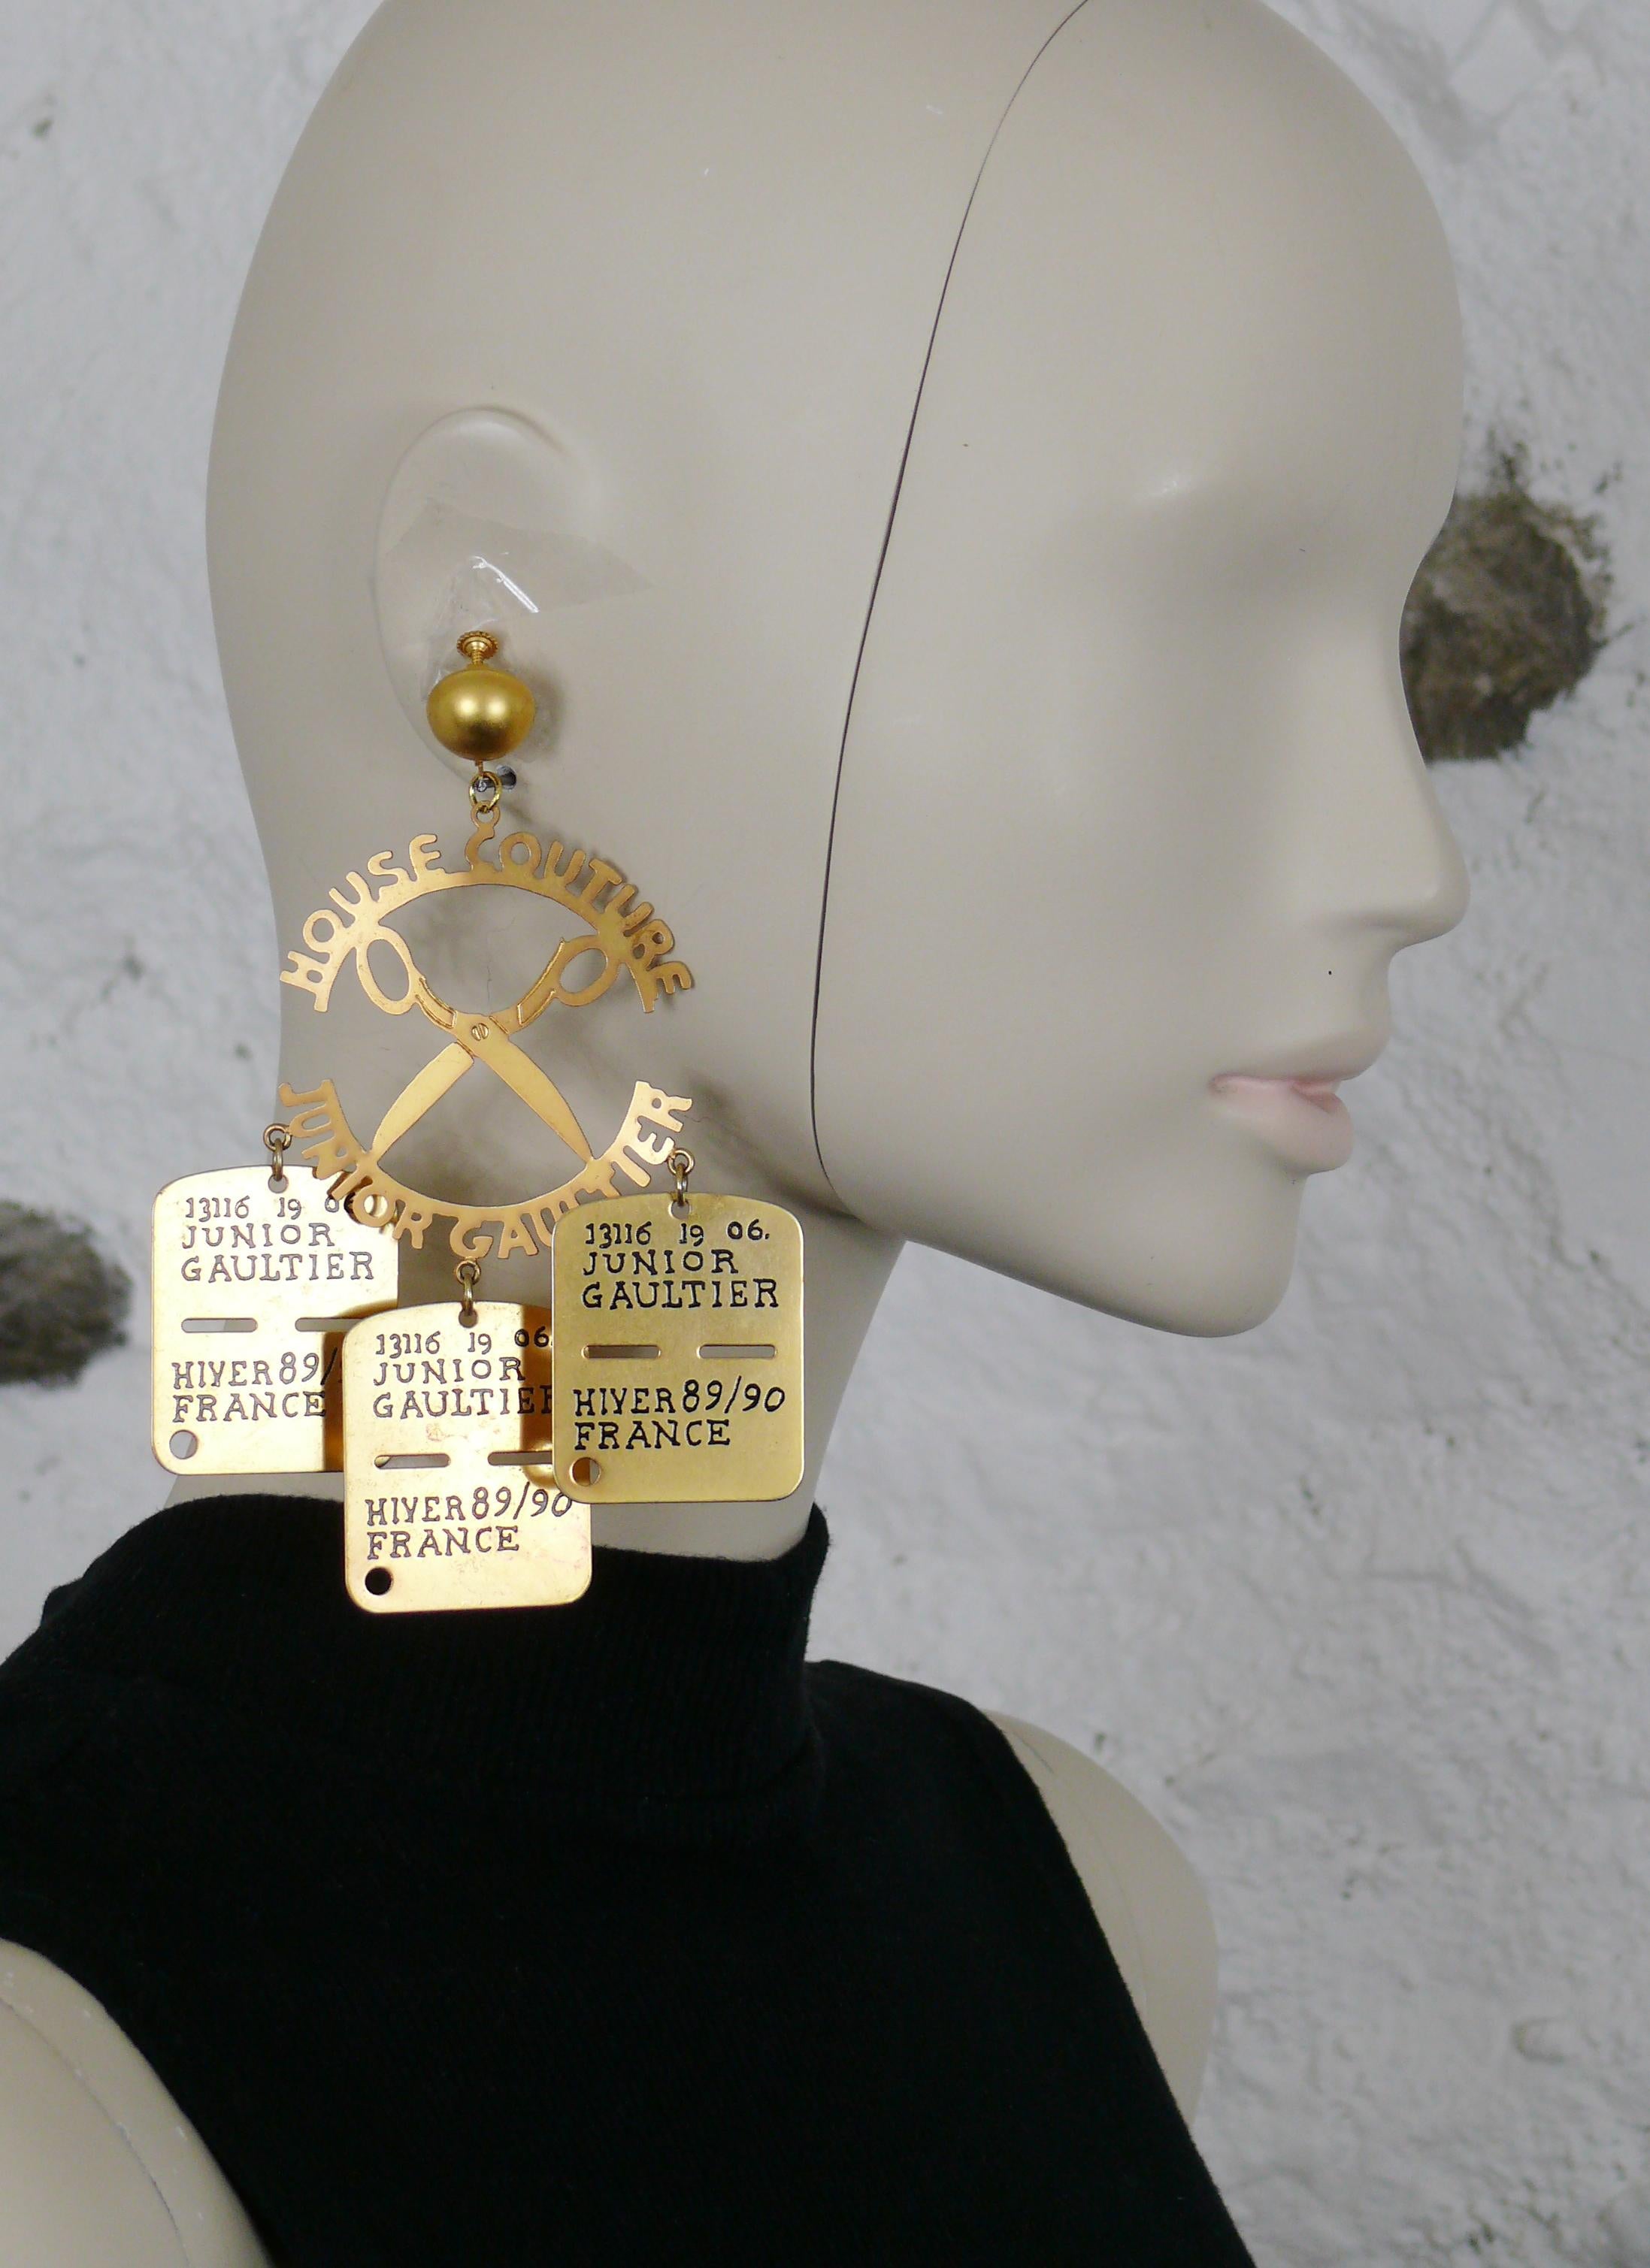 JEAN PAUL GAULTIER vintage rare massive gold toned mobile dangling earrings (clip-on with screw adjustment system) featuring a large round cut-out advertising sign HOUSE COUTURE JUNIOR GAULTIER and 3 plates charms embossed with numbers, JUNIOR